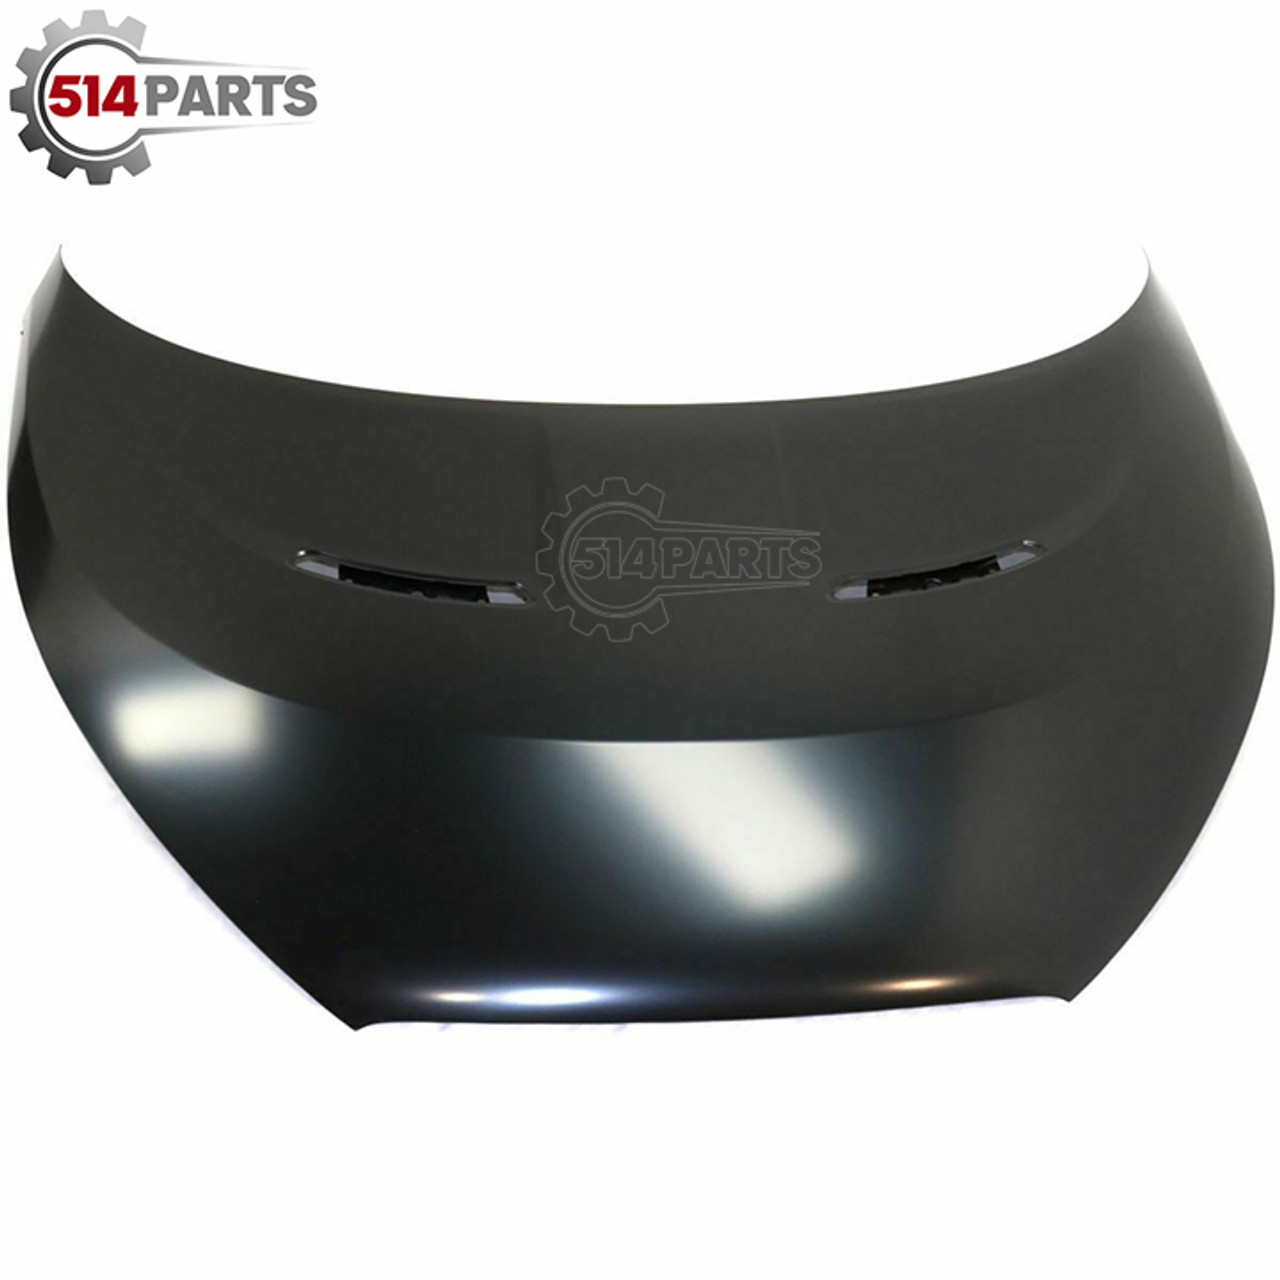 2013 - 2015 HYUNDAI VELOSTER FROM 3/18/13 TO 12/23/14 PRODUCTION DATES STEEL HOOD - CAPOT en ACIER